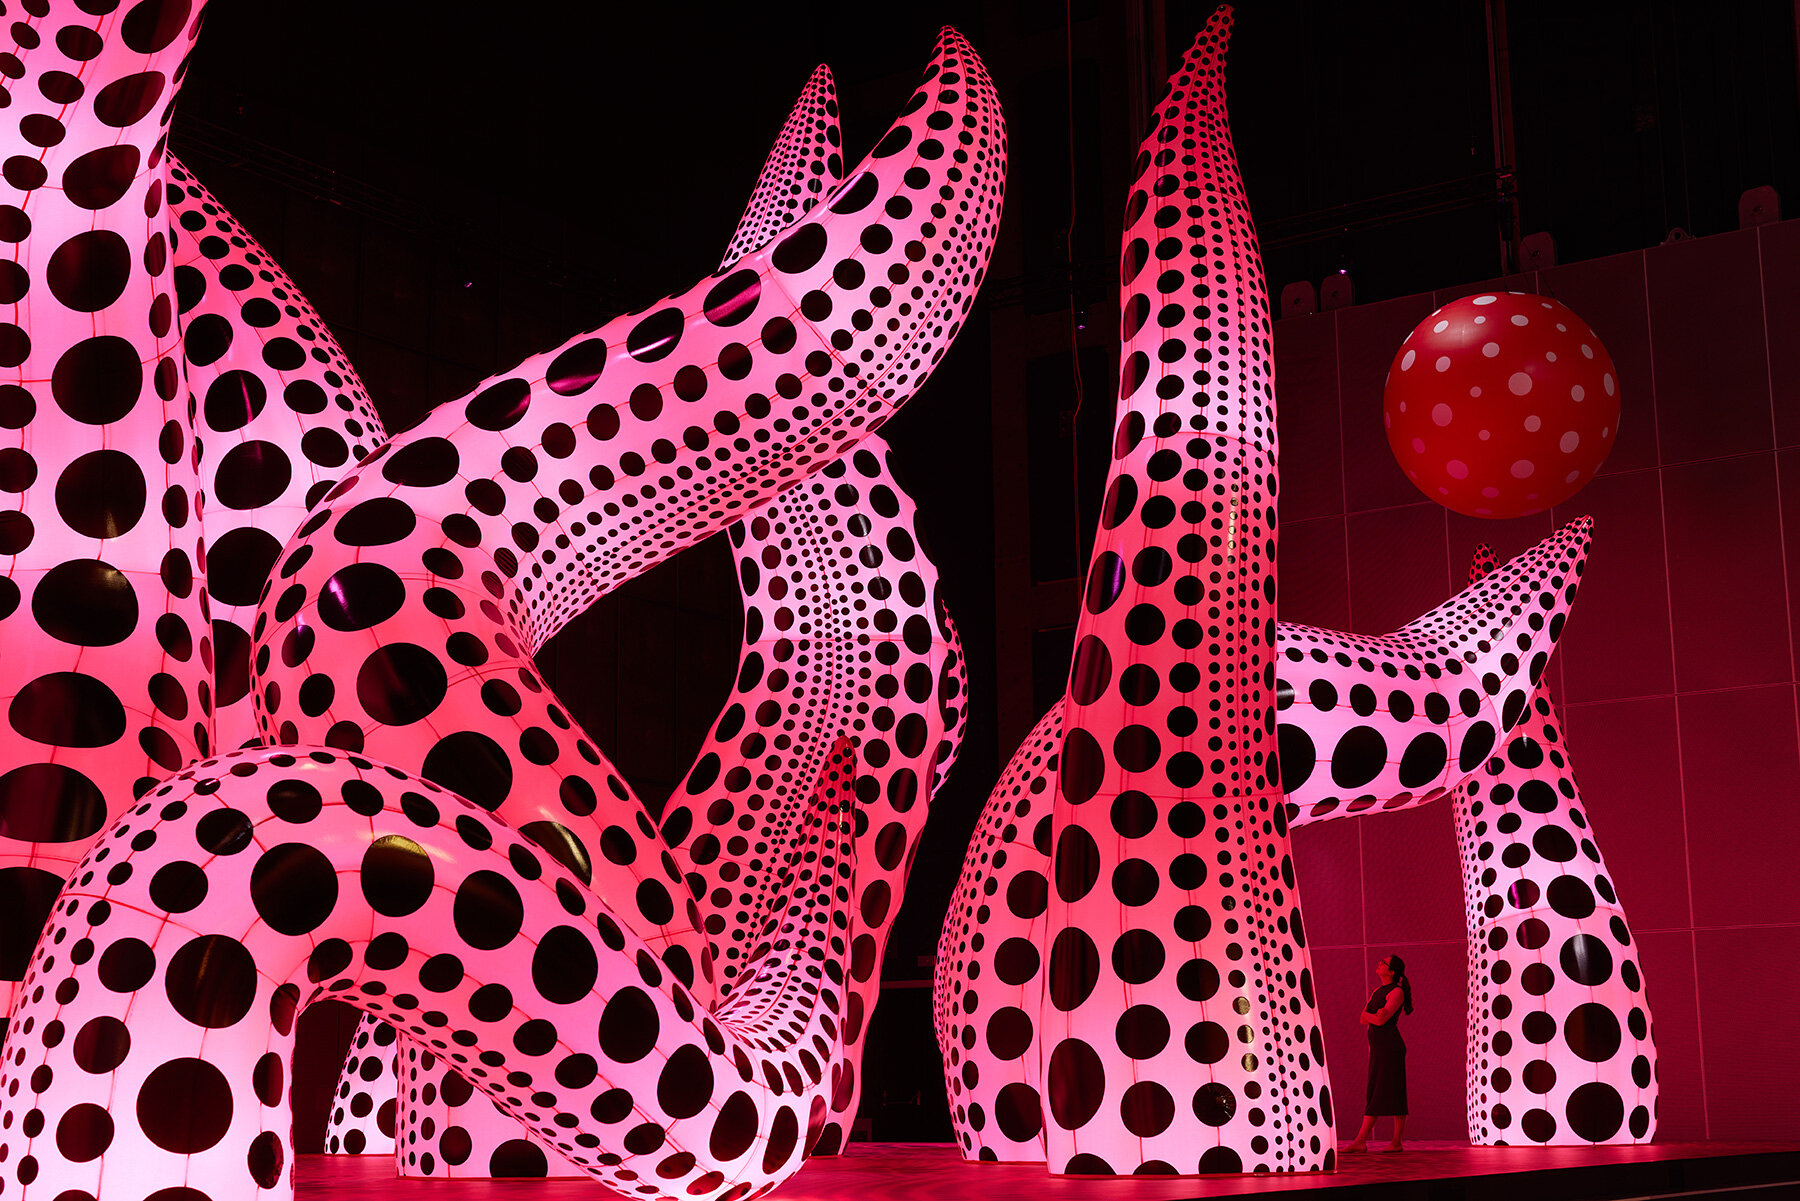 Have you seen the giant Yayoi Kusama installation outside of @harrods , London